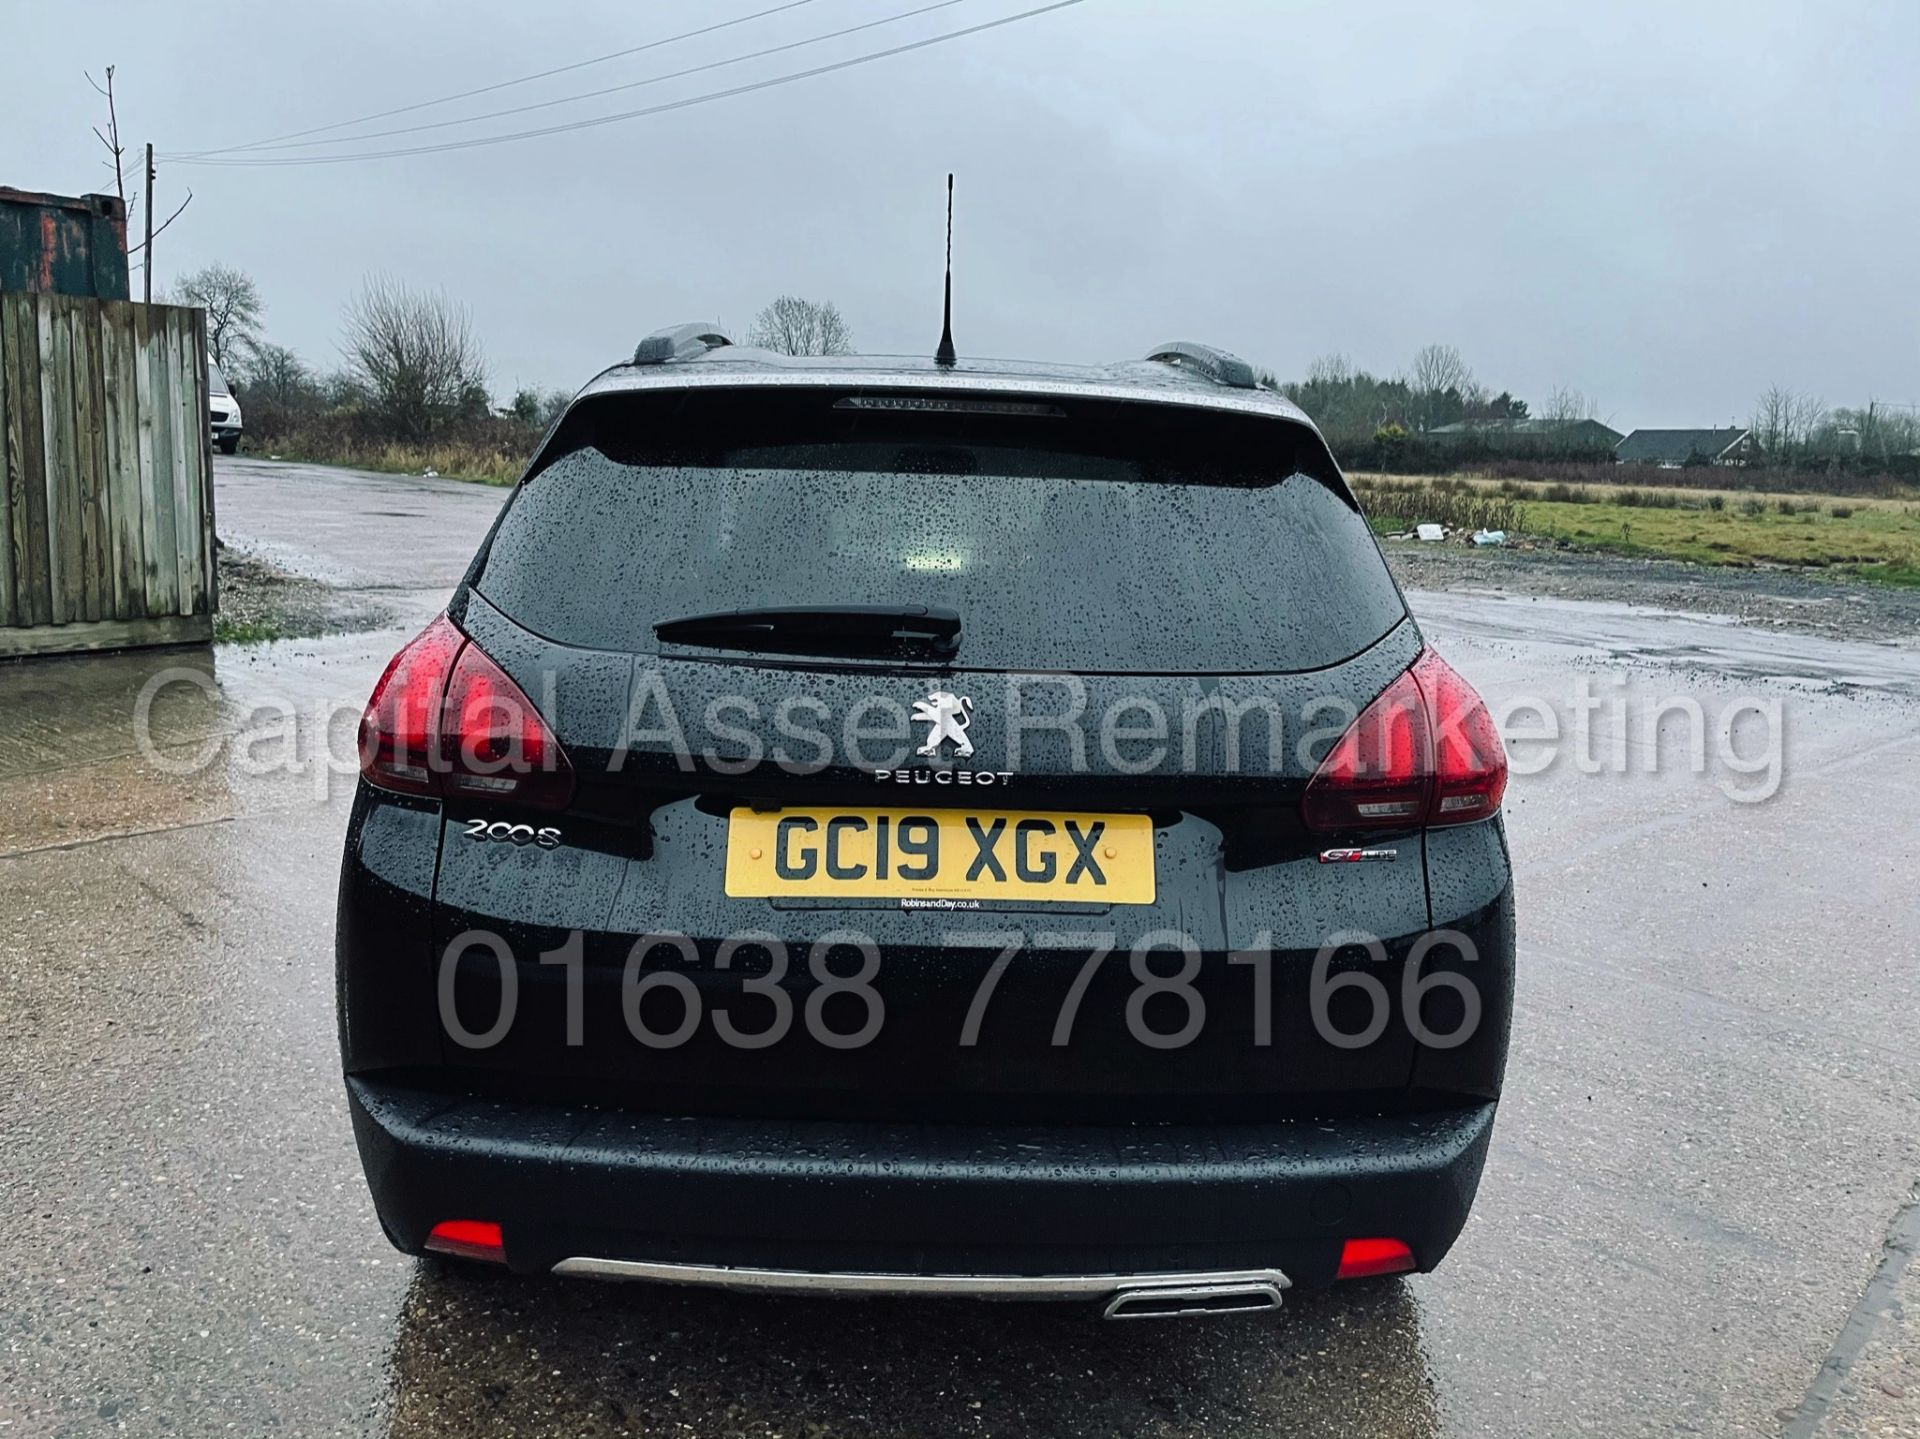 PEUGEOT 2008 *GT LINE* SUV / MPV (2019 - EURO 6) '1.5 BLUE HDI' *SAT NAV - PAN ROOF' *LOW MILES* - Image 11 of 46